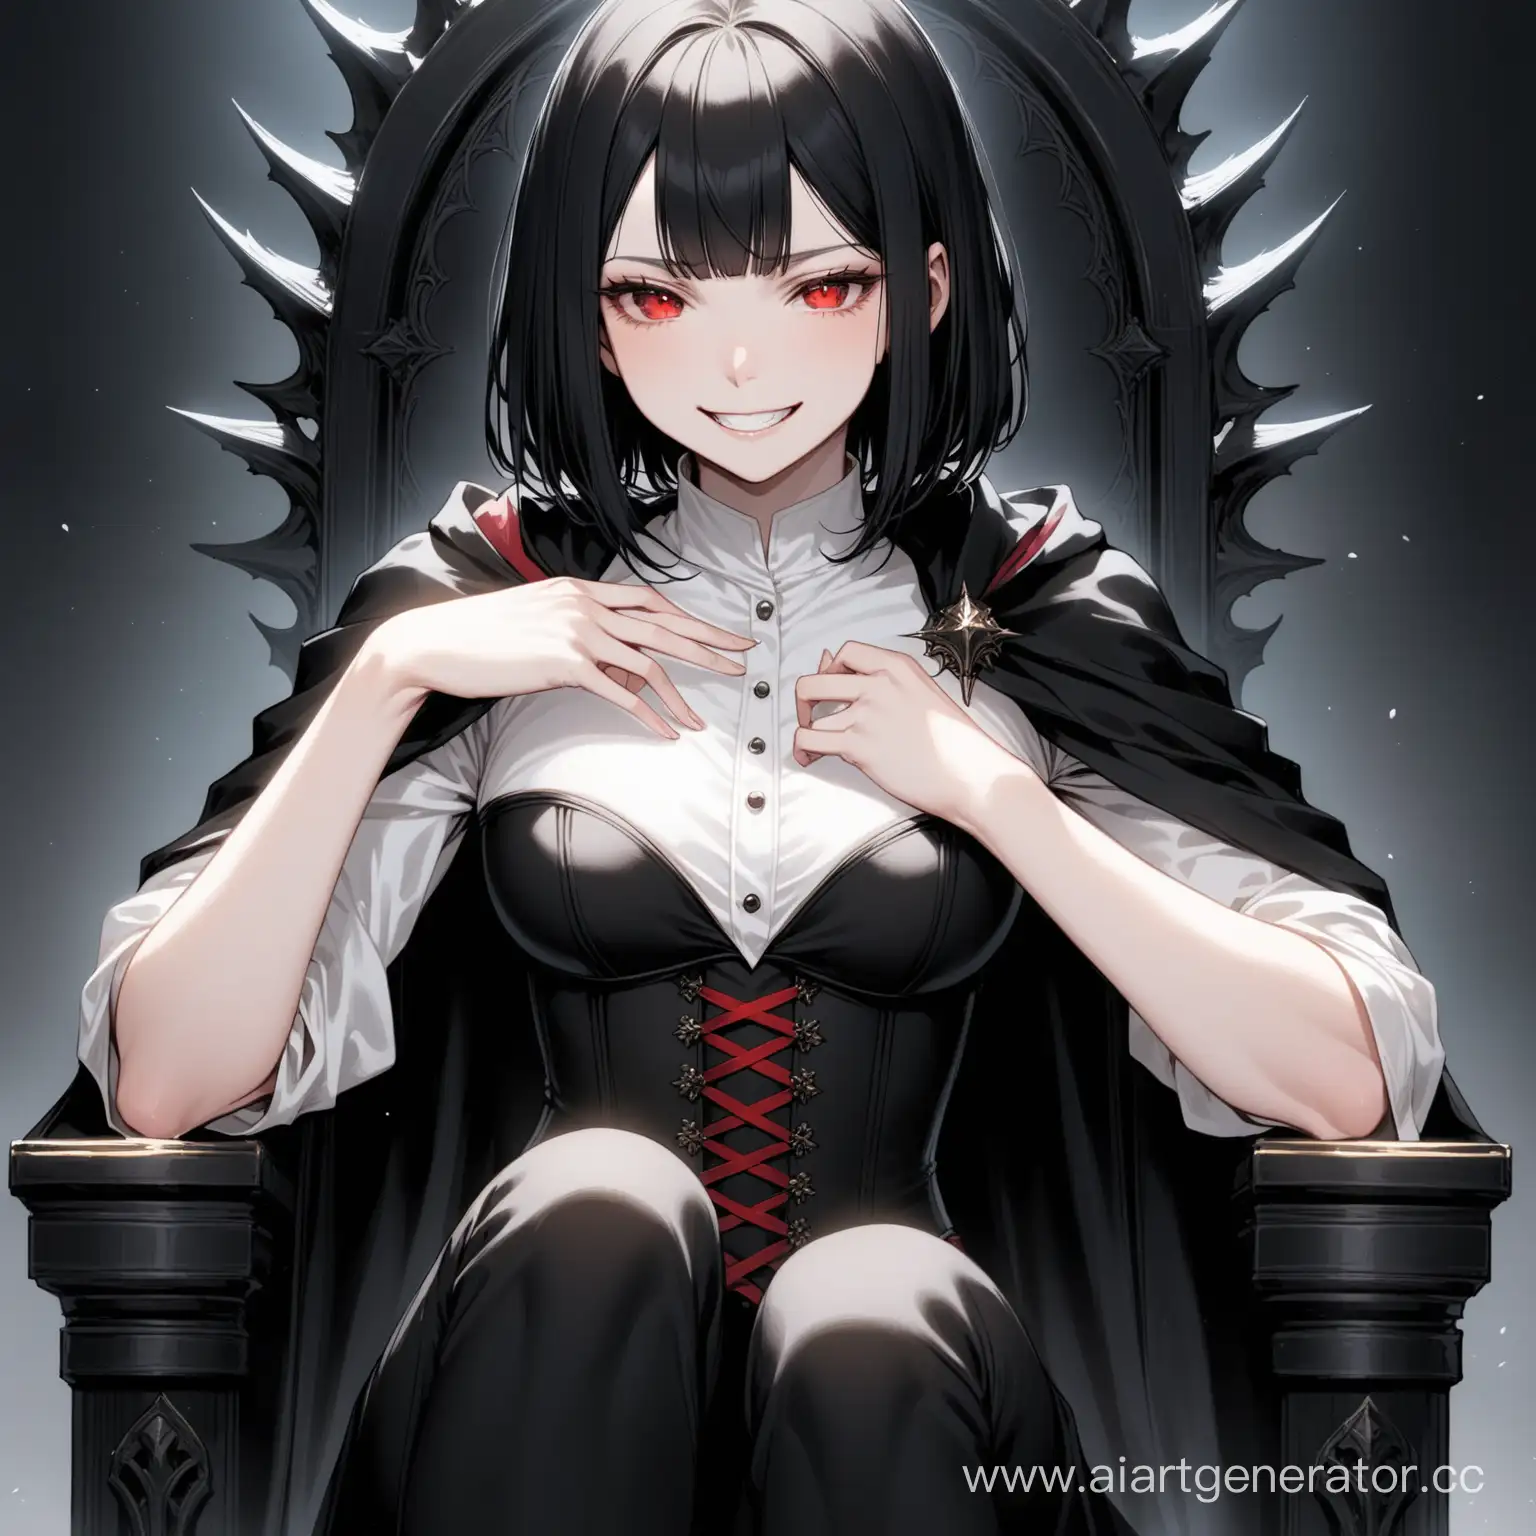 Sinister-Pale-Girl-in-Black-Garb-on-Throne